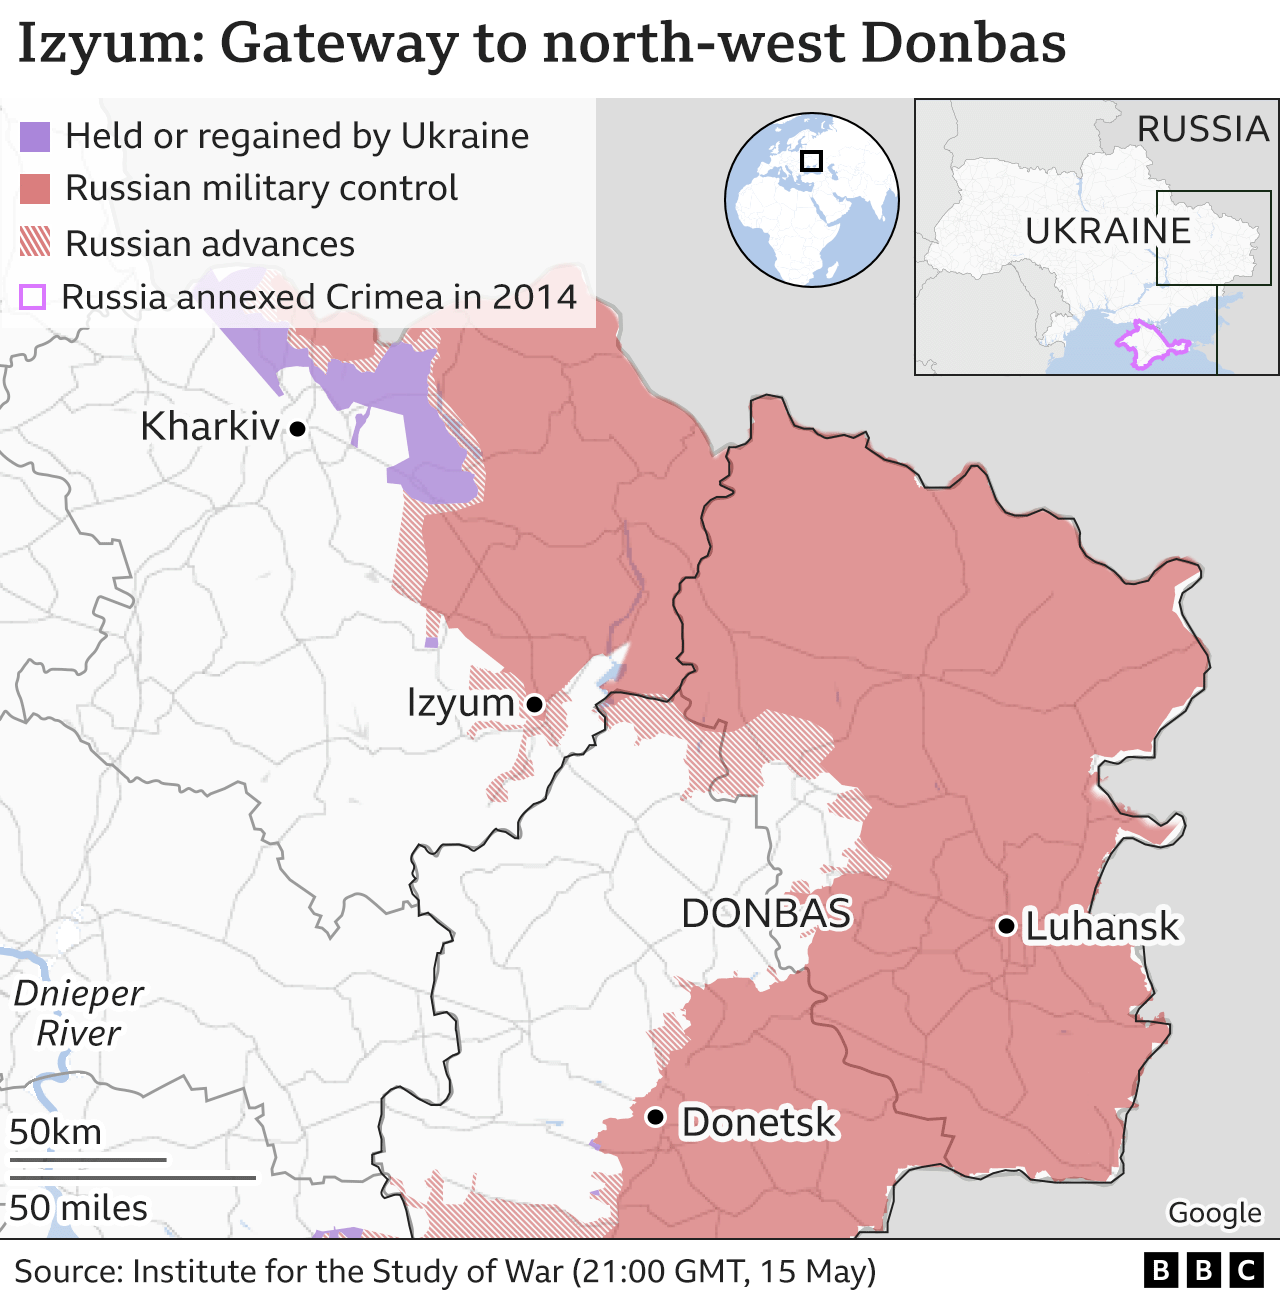 Map showing Izyum and north-west Donbas